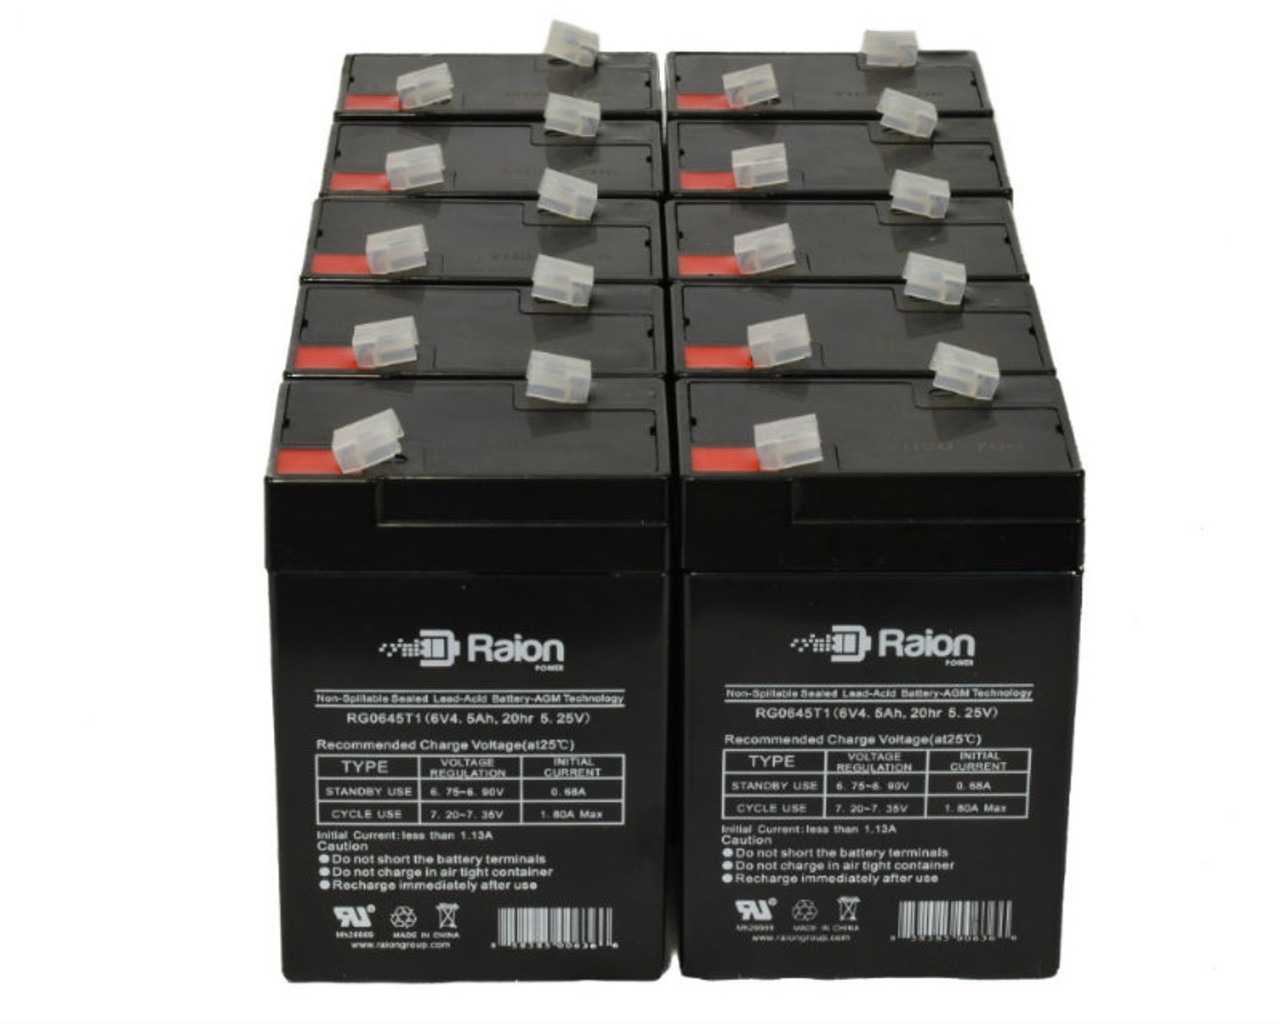 Raion Power 6V 4.5Ah Replacement Emergency Light Battery for ELS ELS EDS640F - 10 Pack